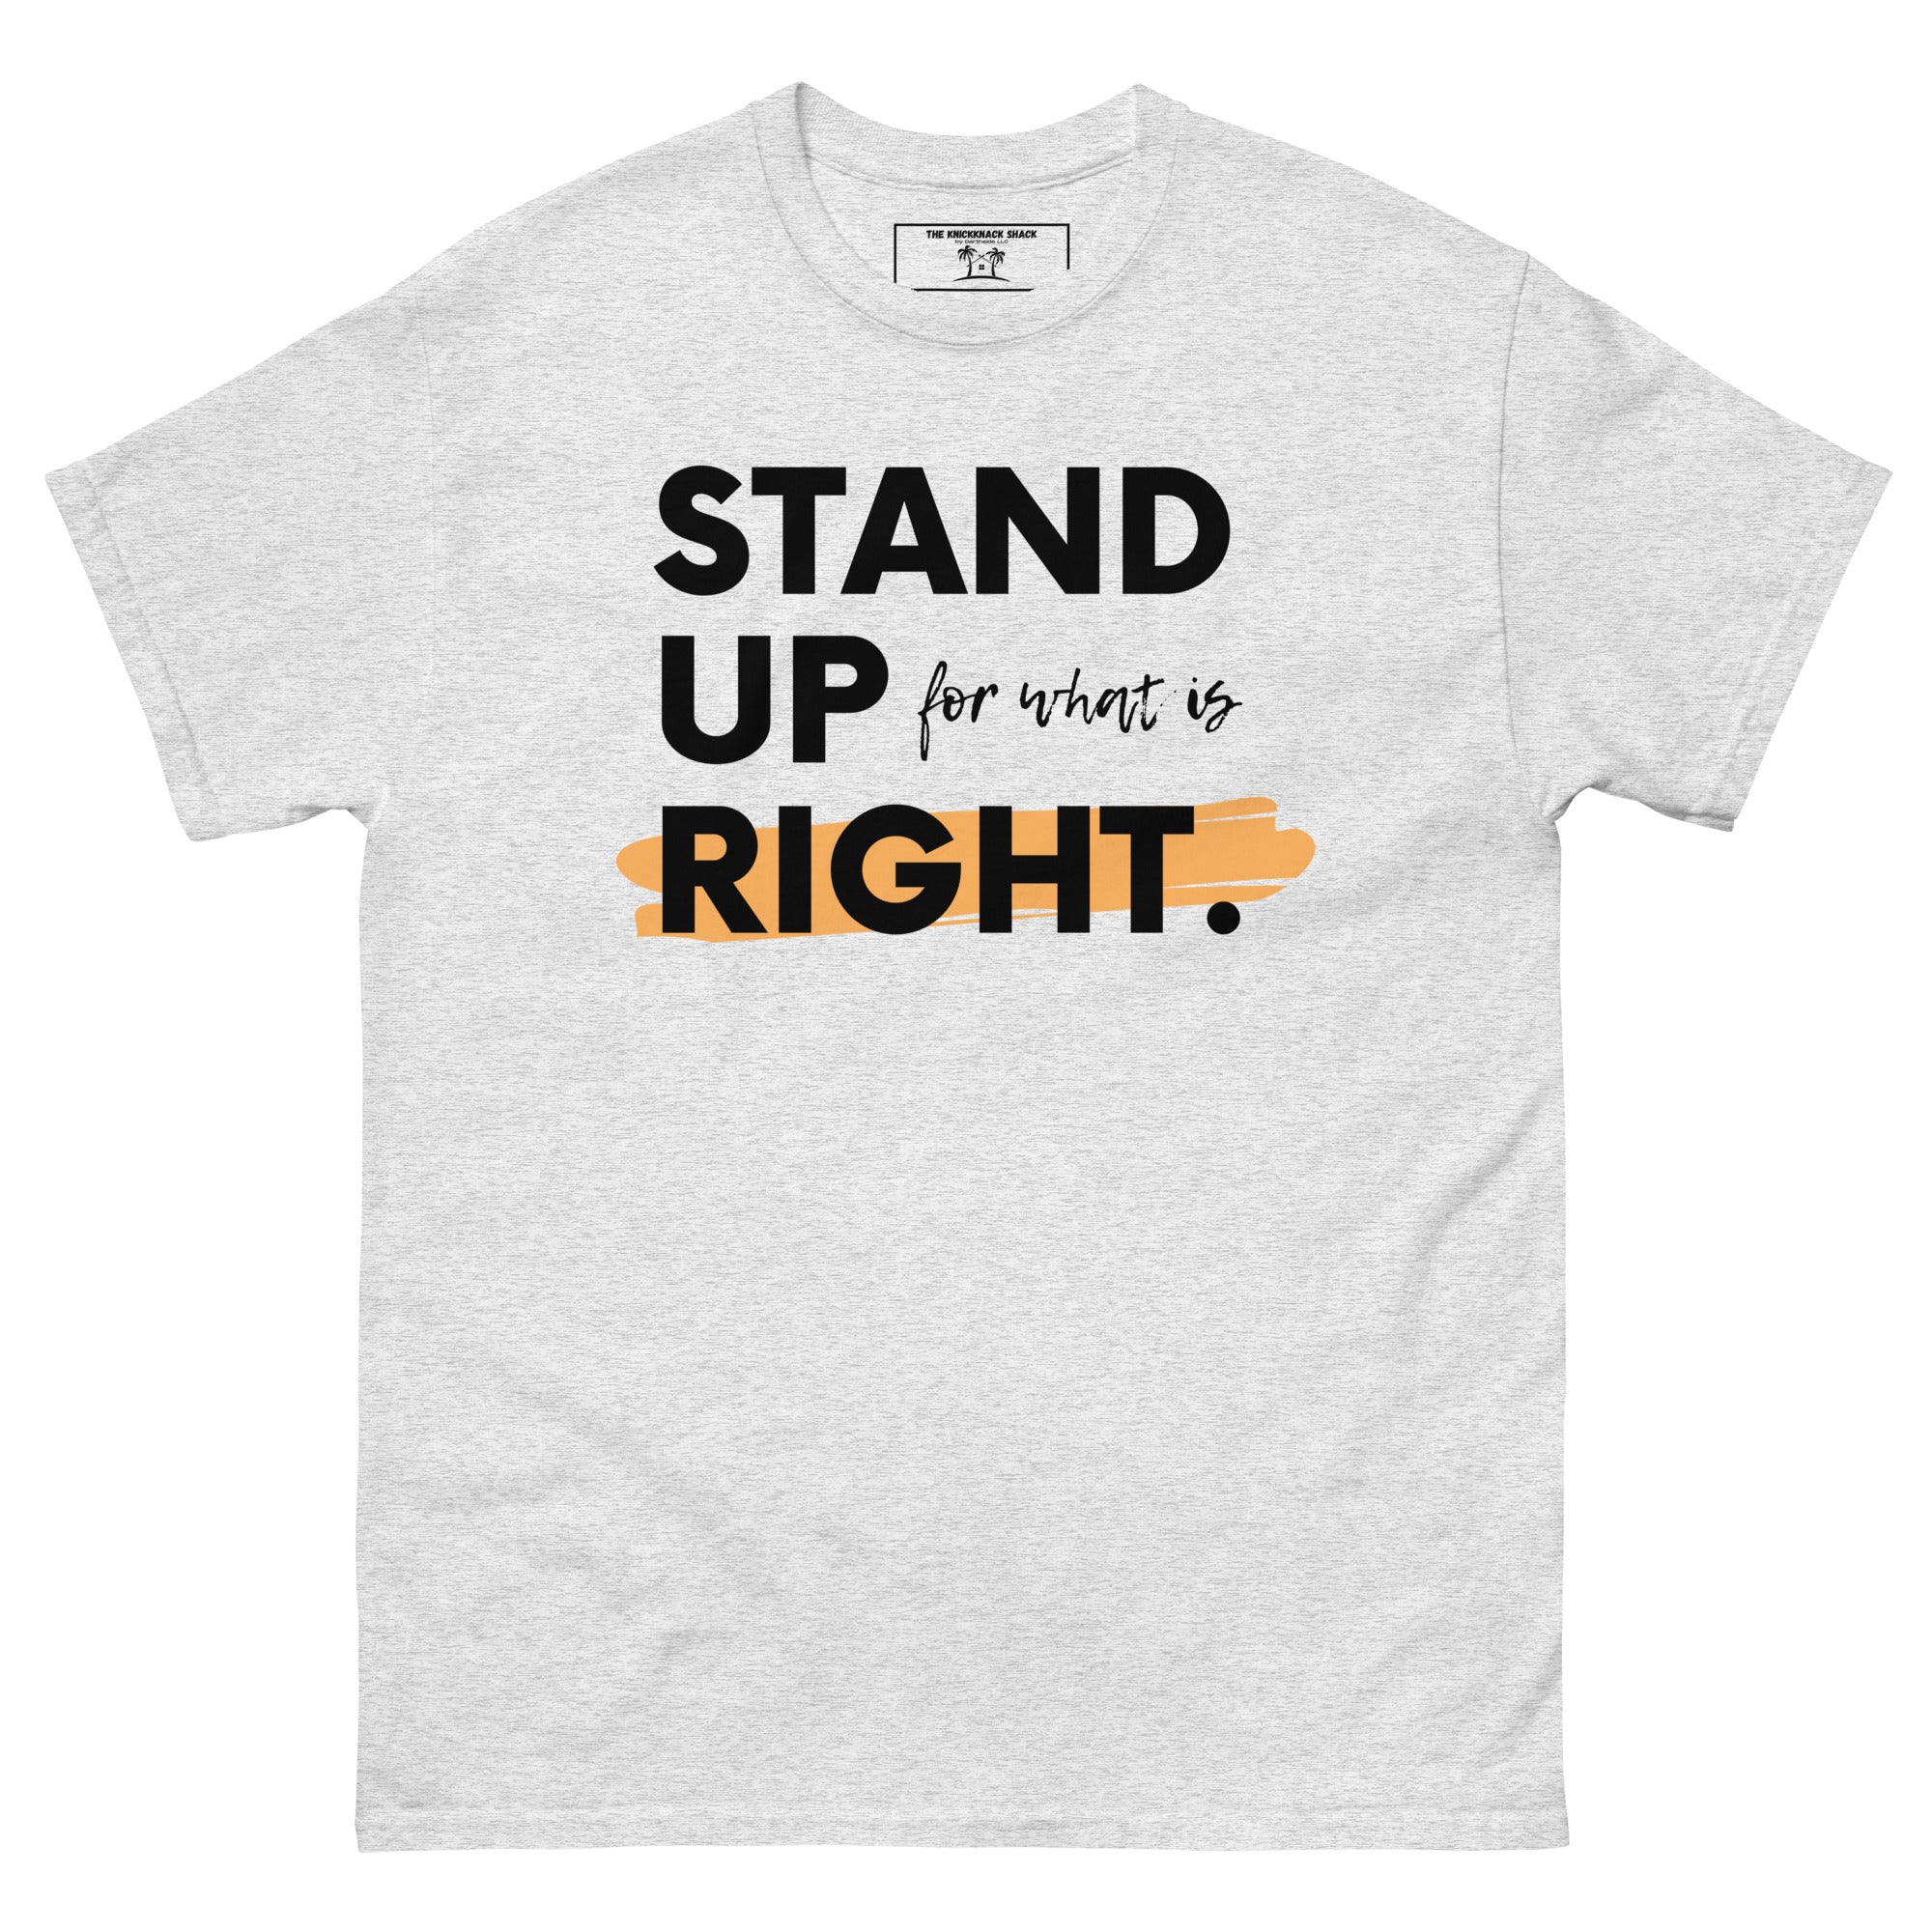 Classic Tee - Stand Up (Light Colors)